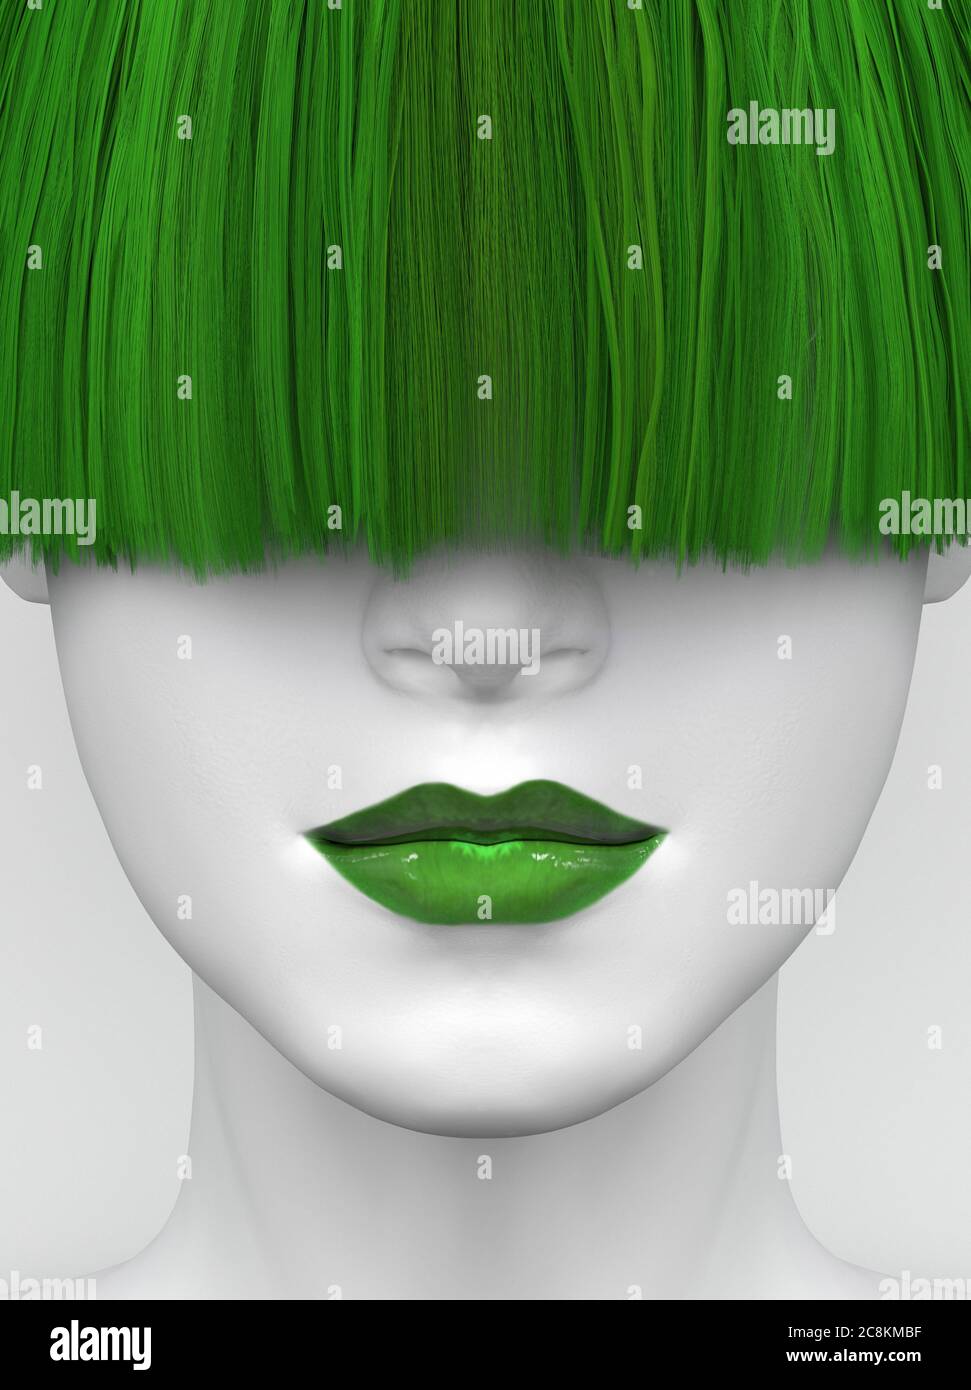 White female face with green lips and long green bangs covering her eyes. Bright colorful hair and makeup. Creative conceptual illustration. 3D render Stock Photo